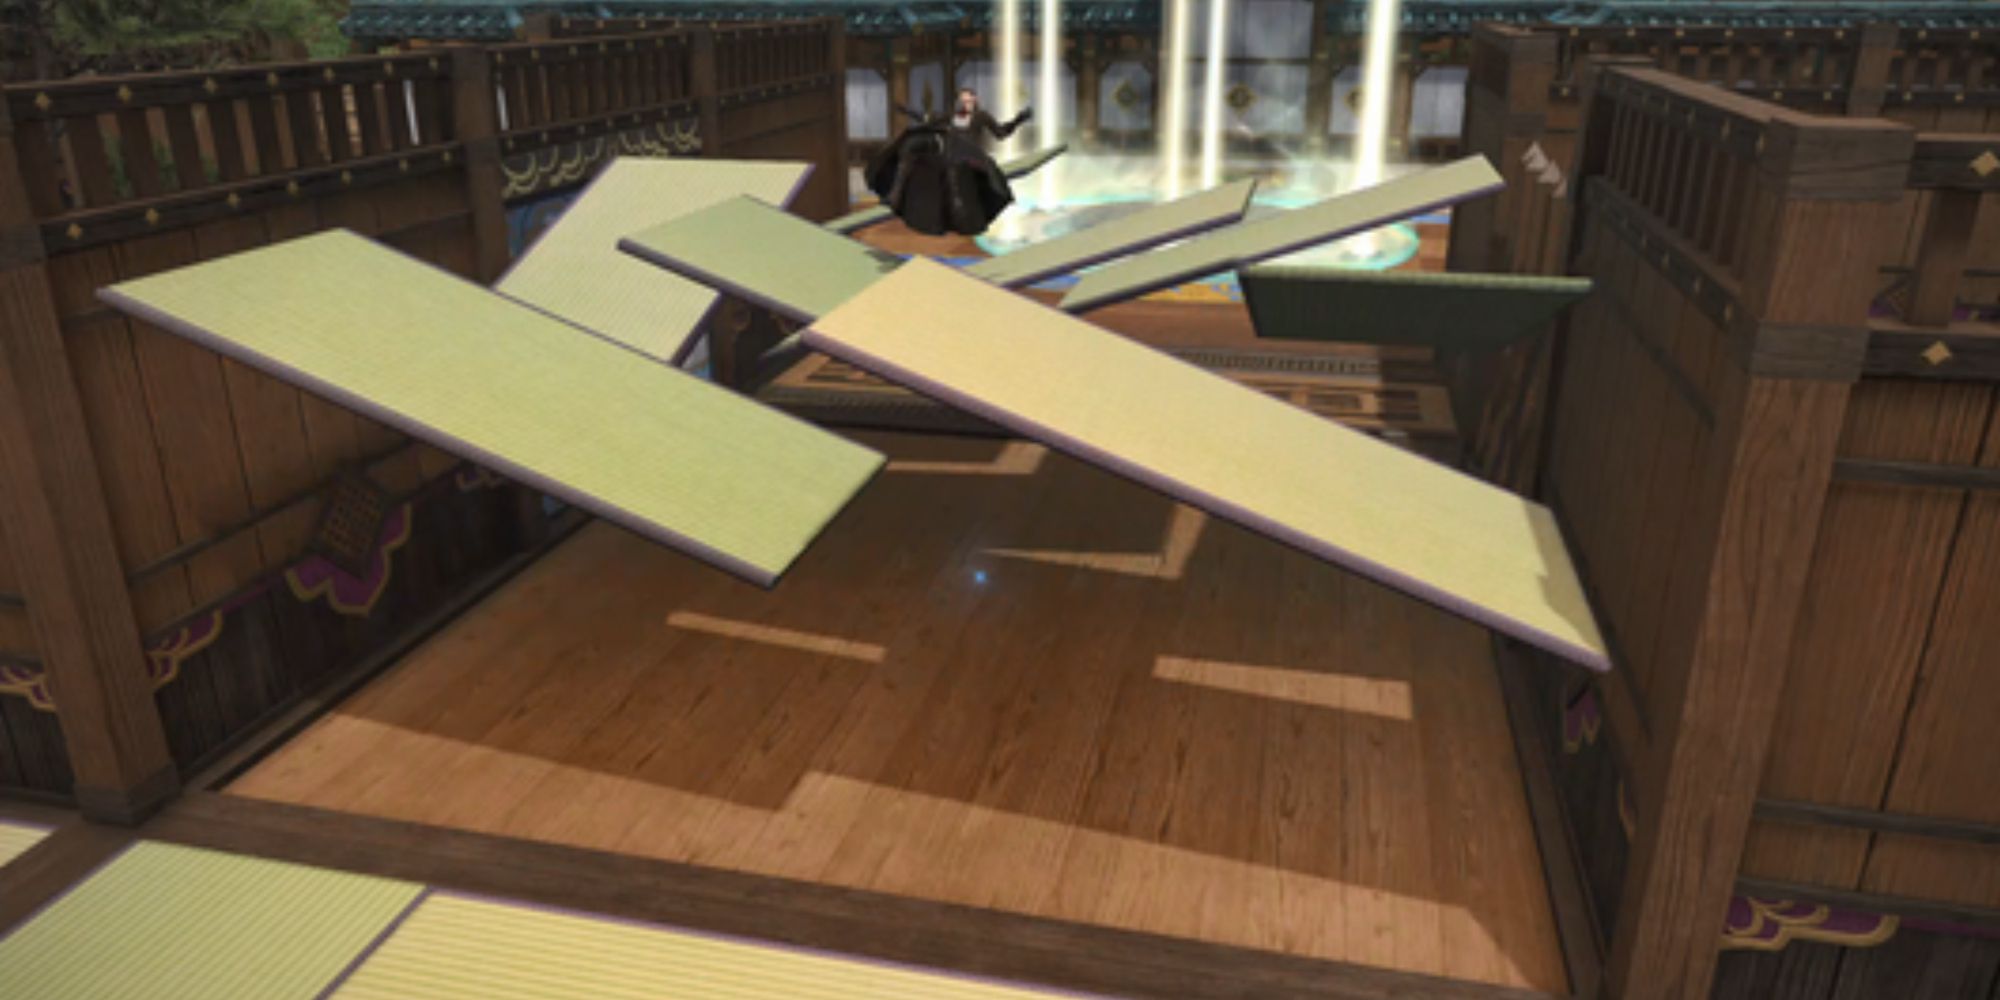 A look at a player getting flung into the air by the Tatami Mat Trick Floors in The Clockwork Castletown PvP Map for Crystalline Conflict in Final Fantasy 14